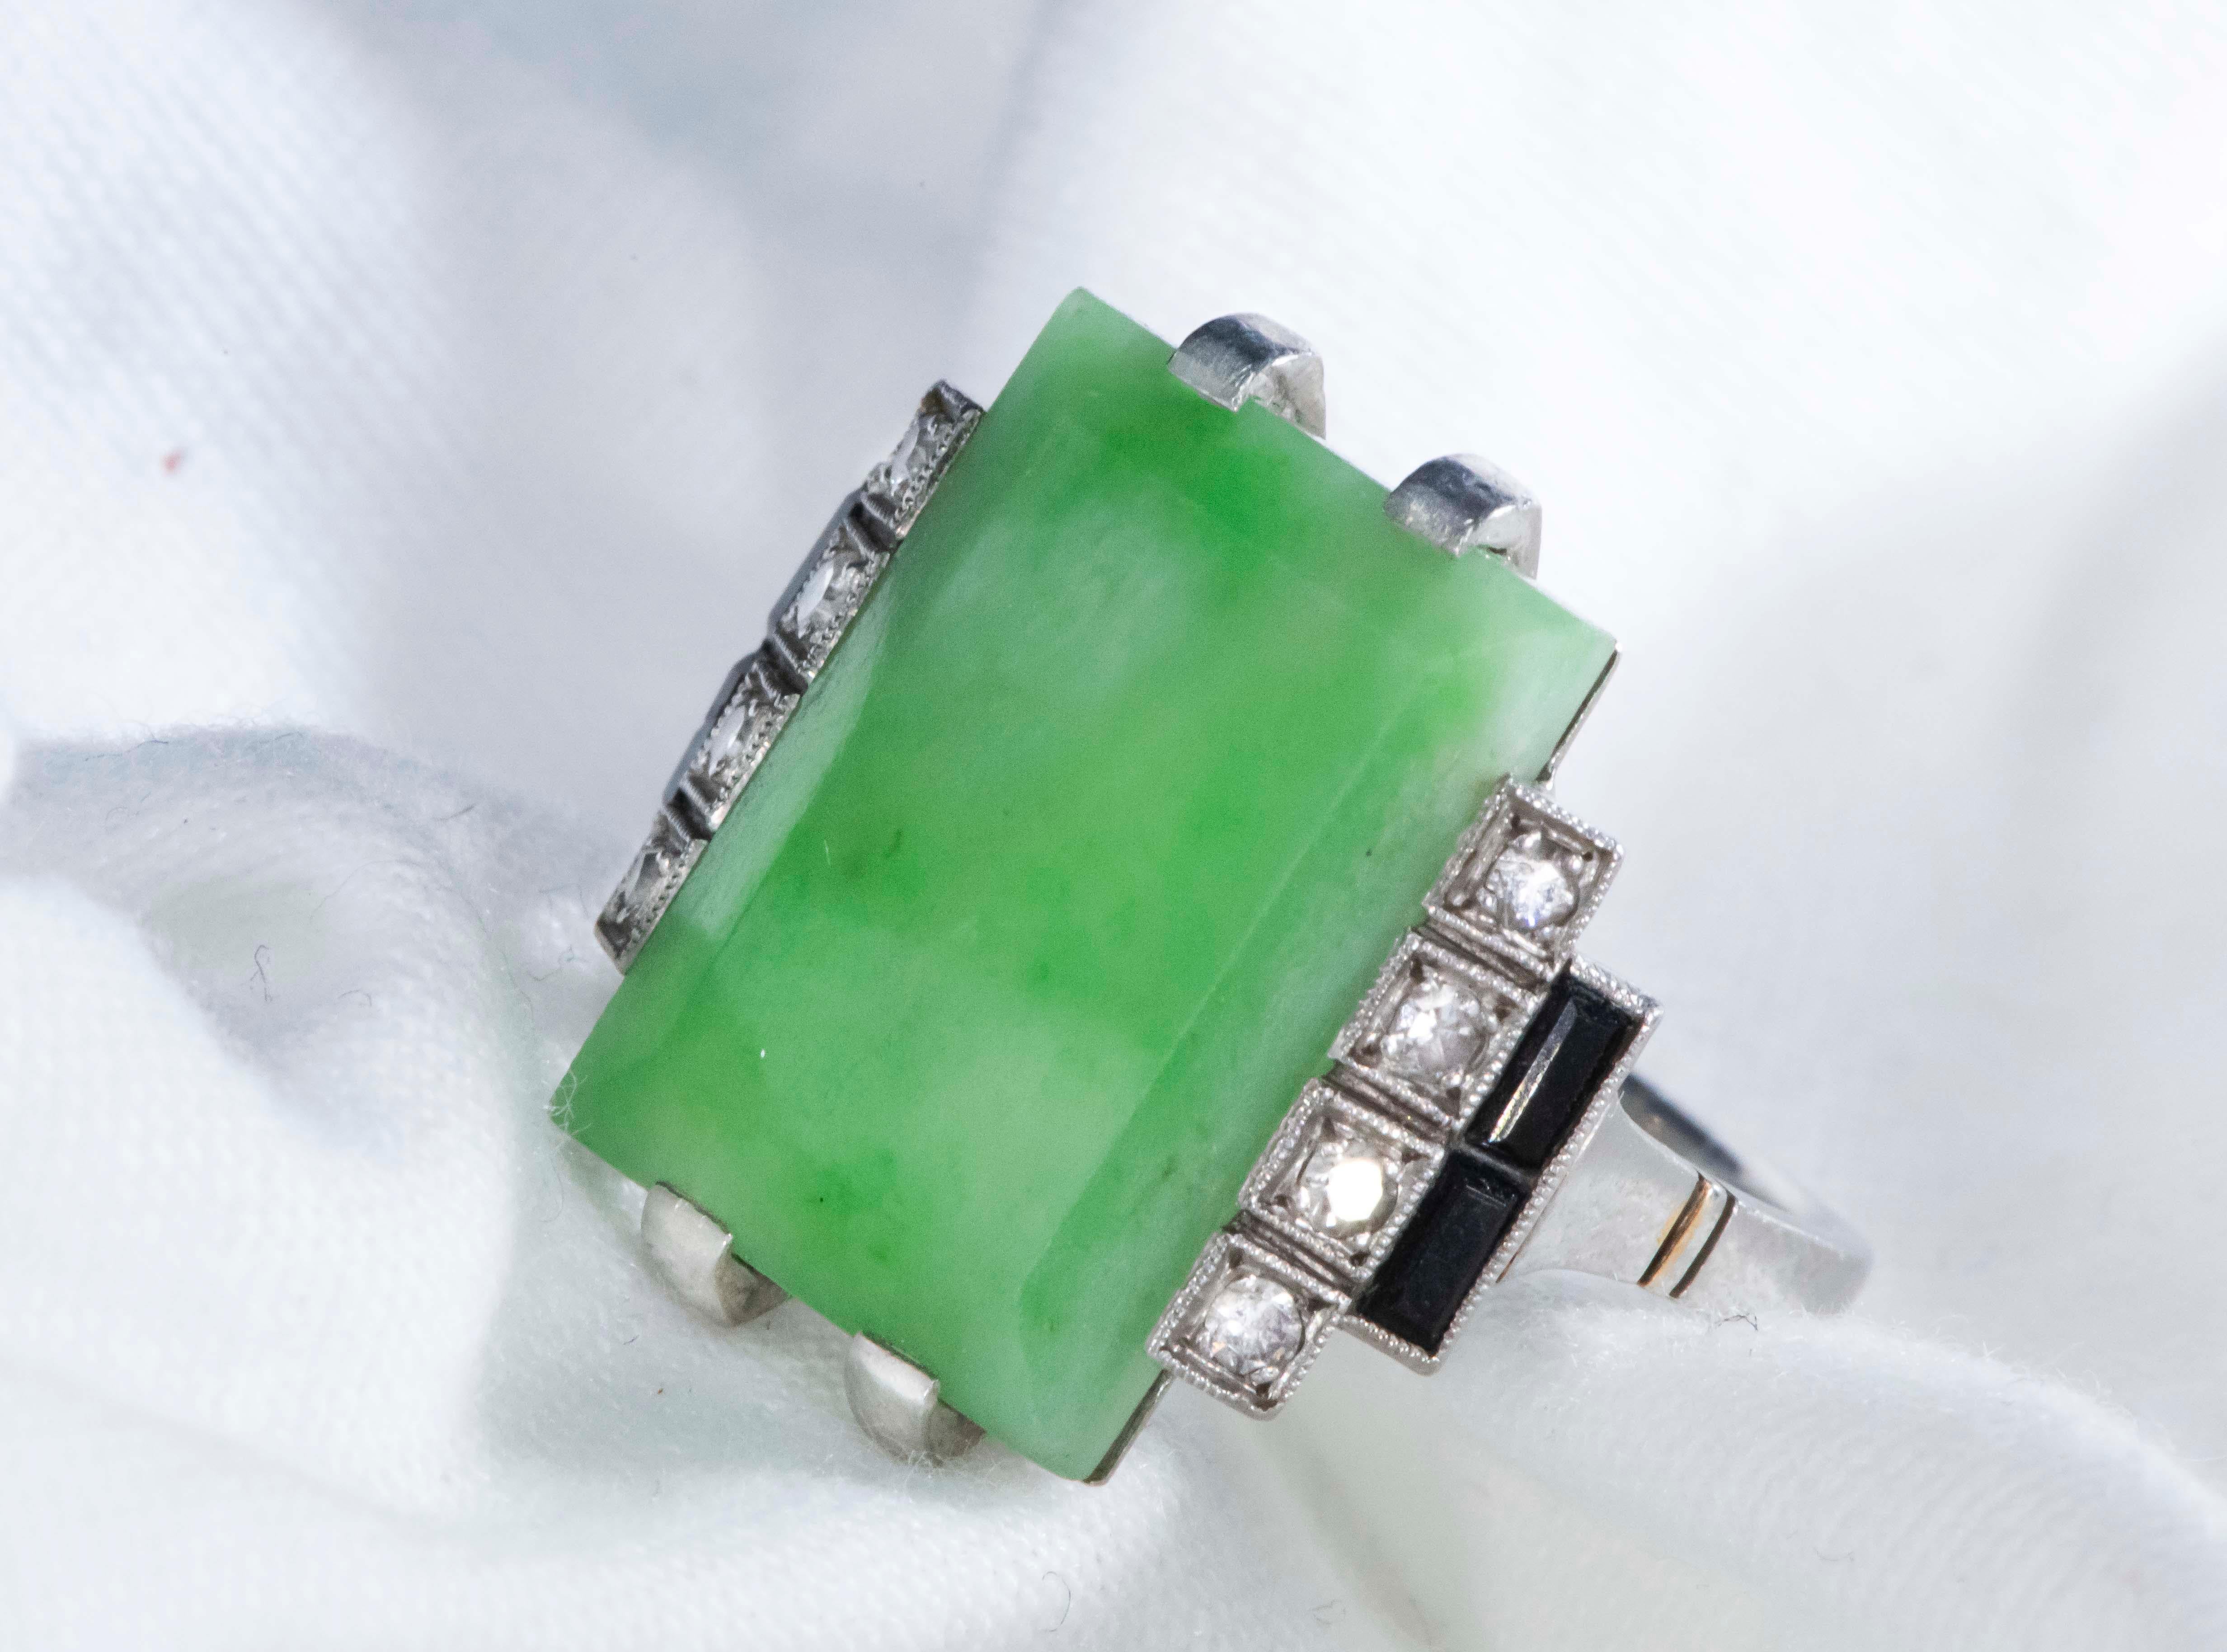 Specifications & Dimensions
The present ring is a very impressive and sophisticated large 1920s French Hallmarked Art Deco Platinum Diamond Set  Onyx Green Jade ring. 
The jade center stone shows excellent color throughout and the center stone